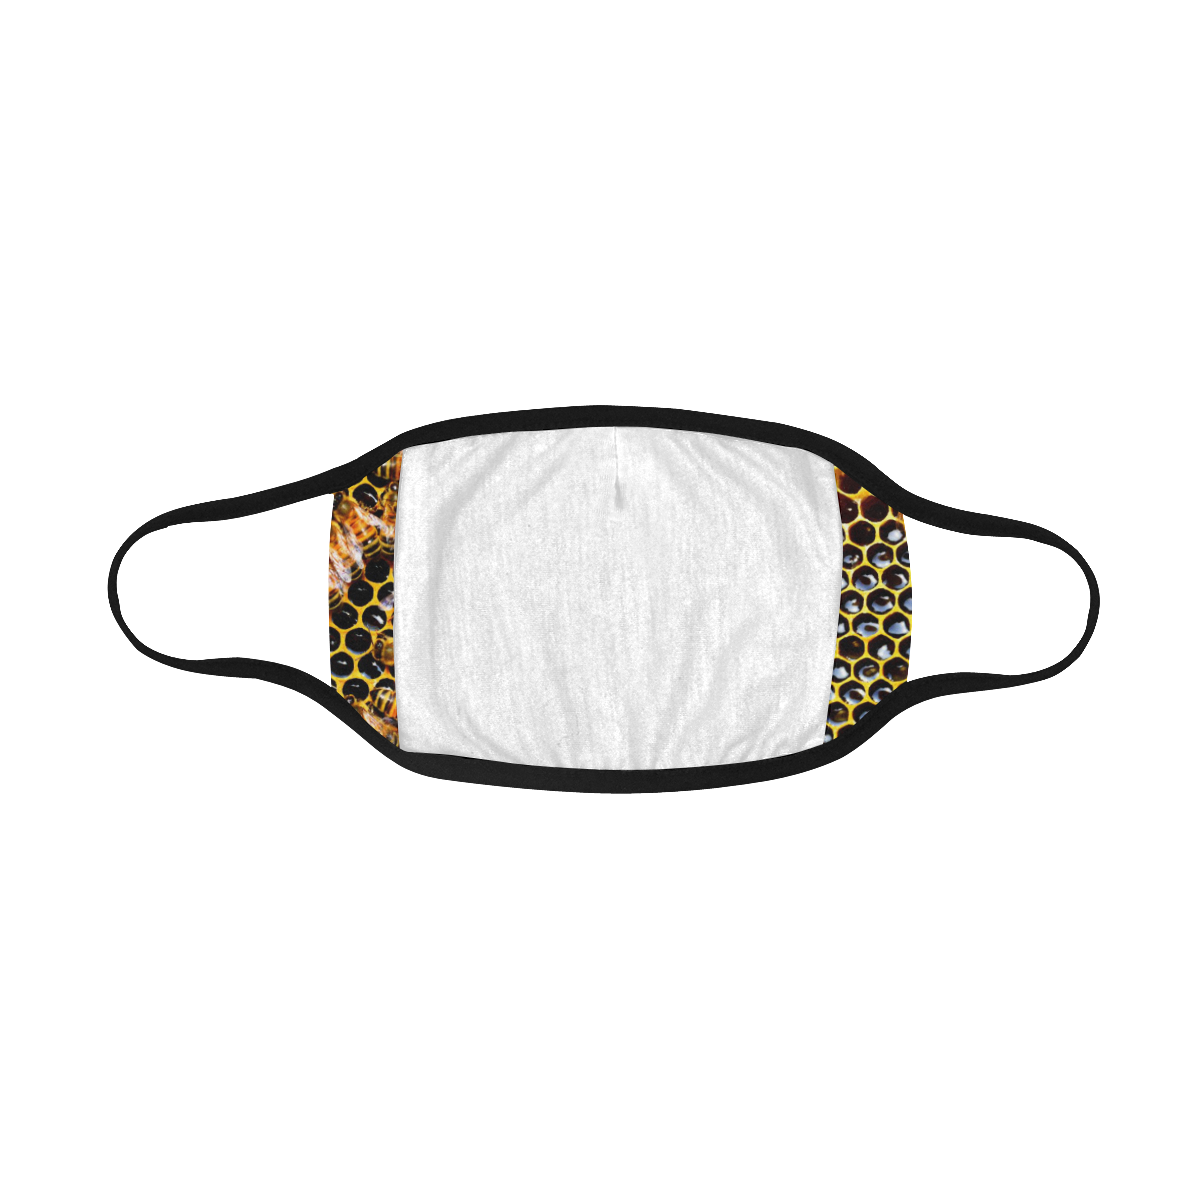 HONEY BEES 5 Mouth Mask